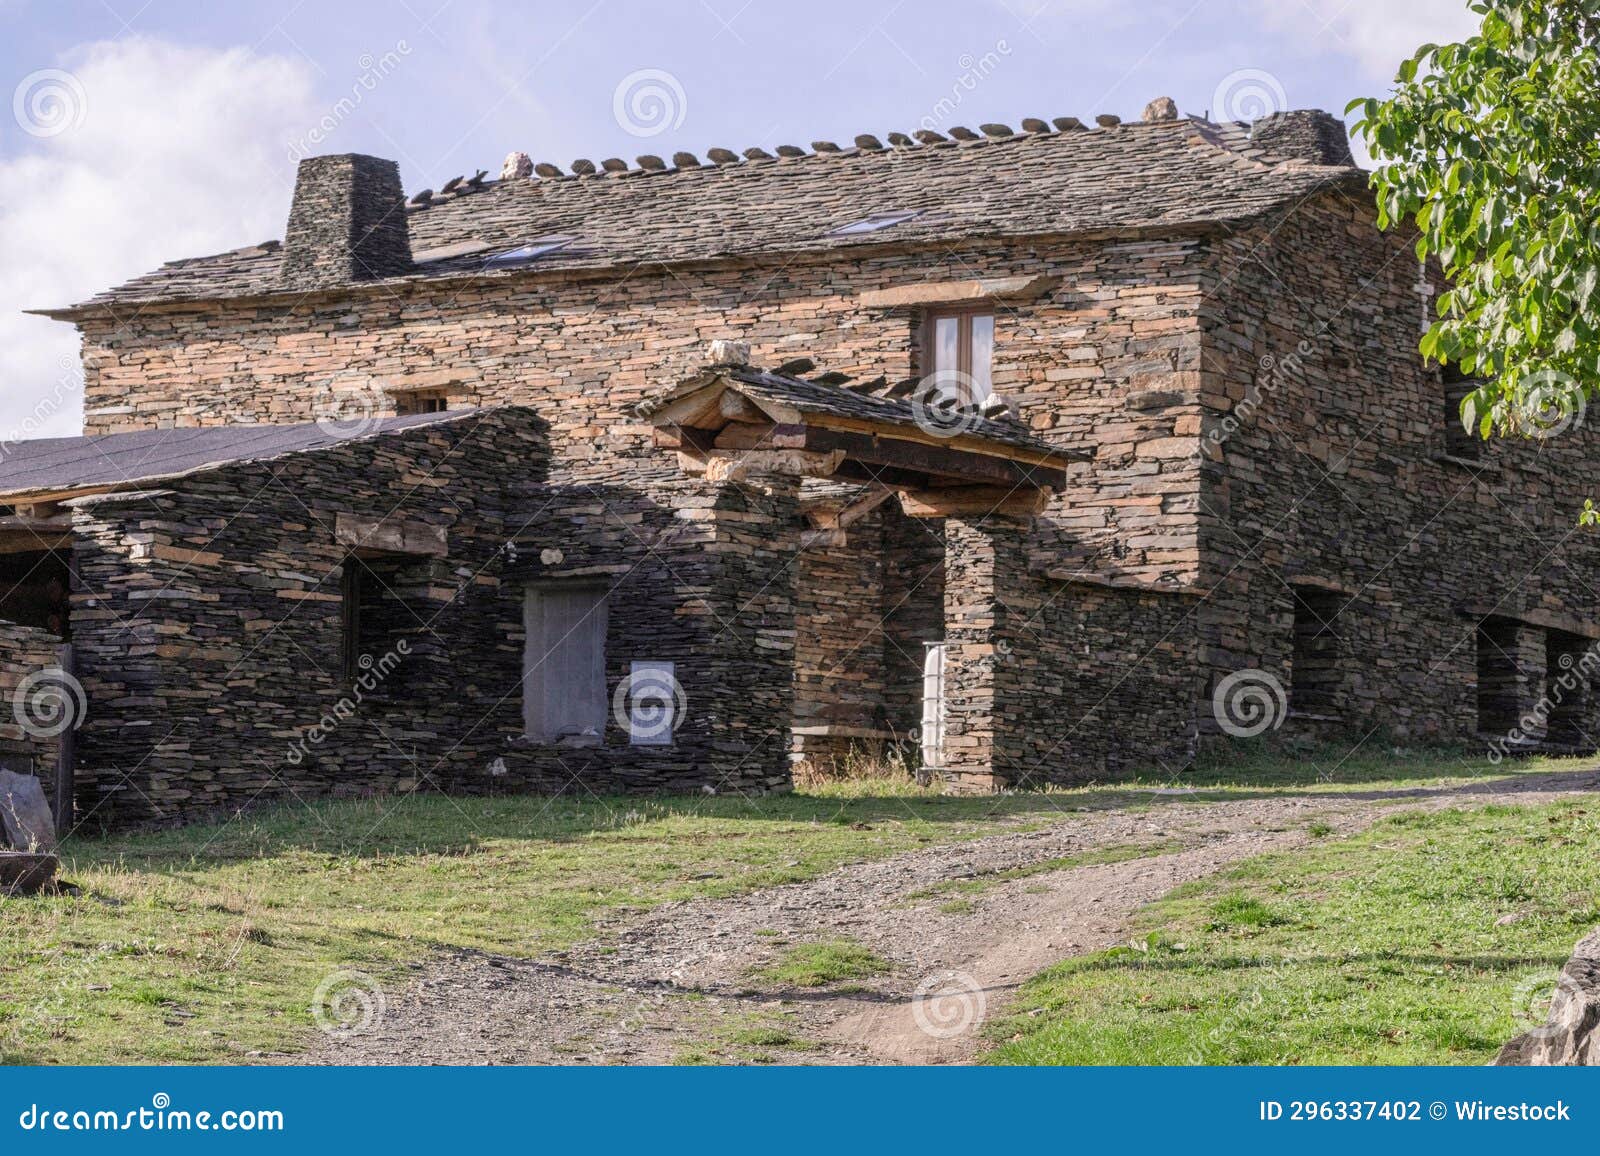 stone house in the middle of the countryside. typical house of the black tile villages